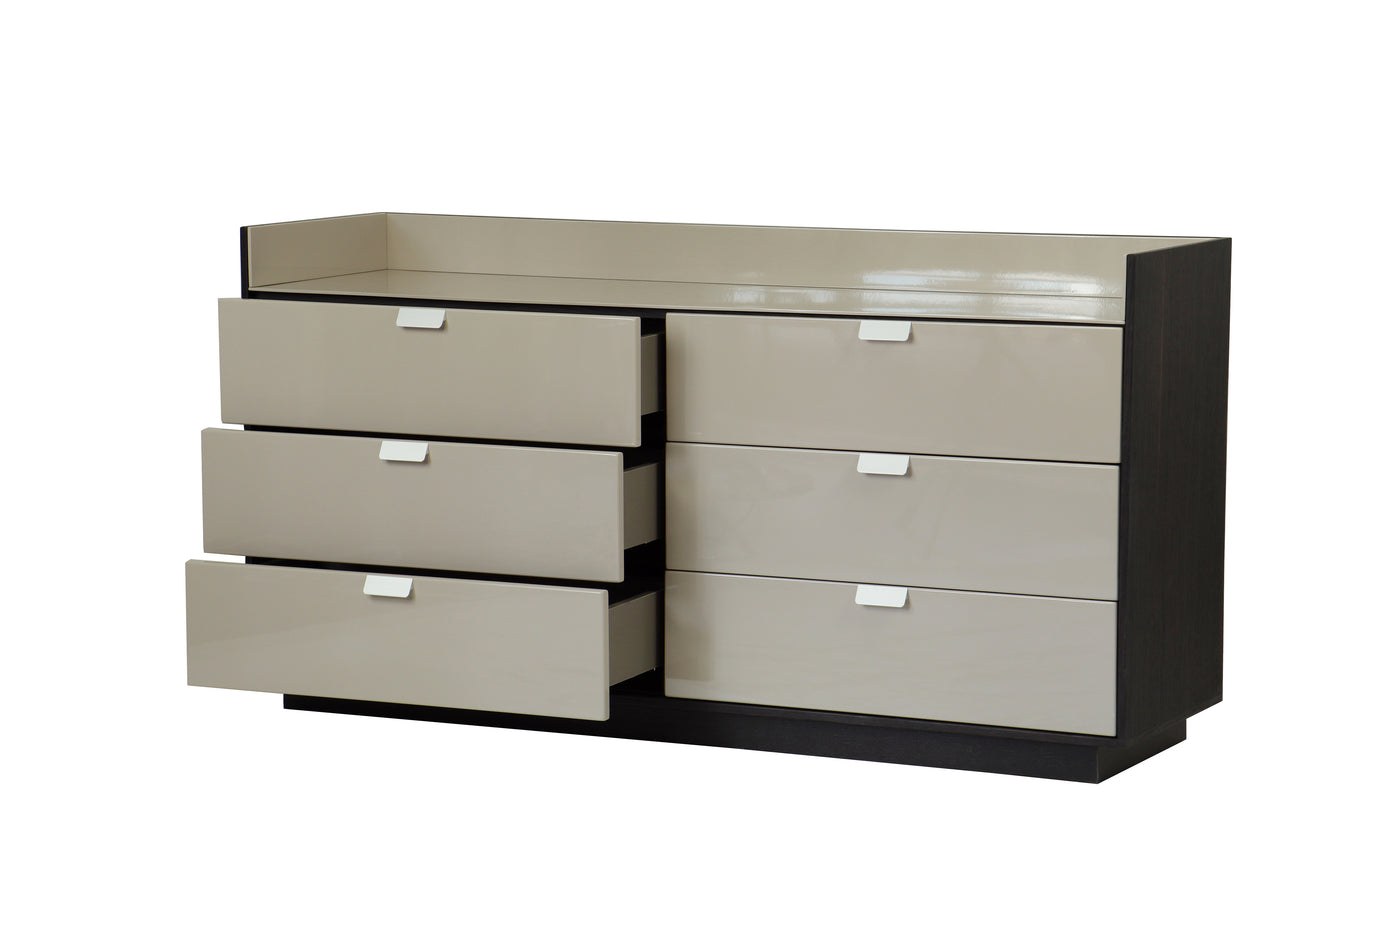 ALLEN CHEST OF 6 DRAWERS